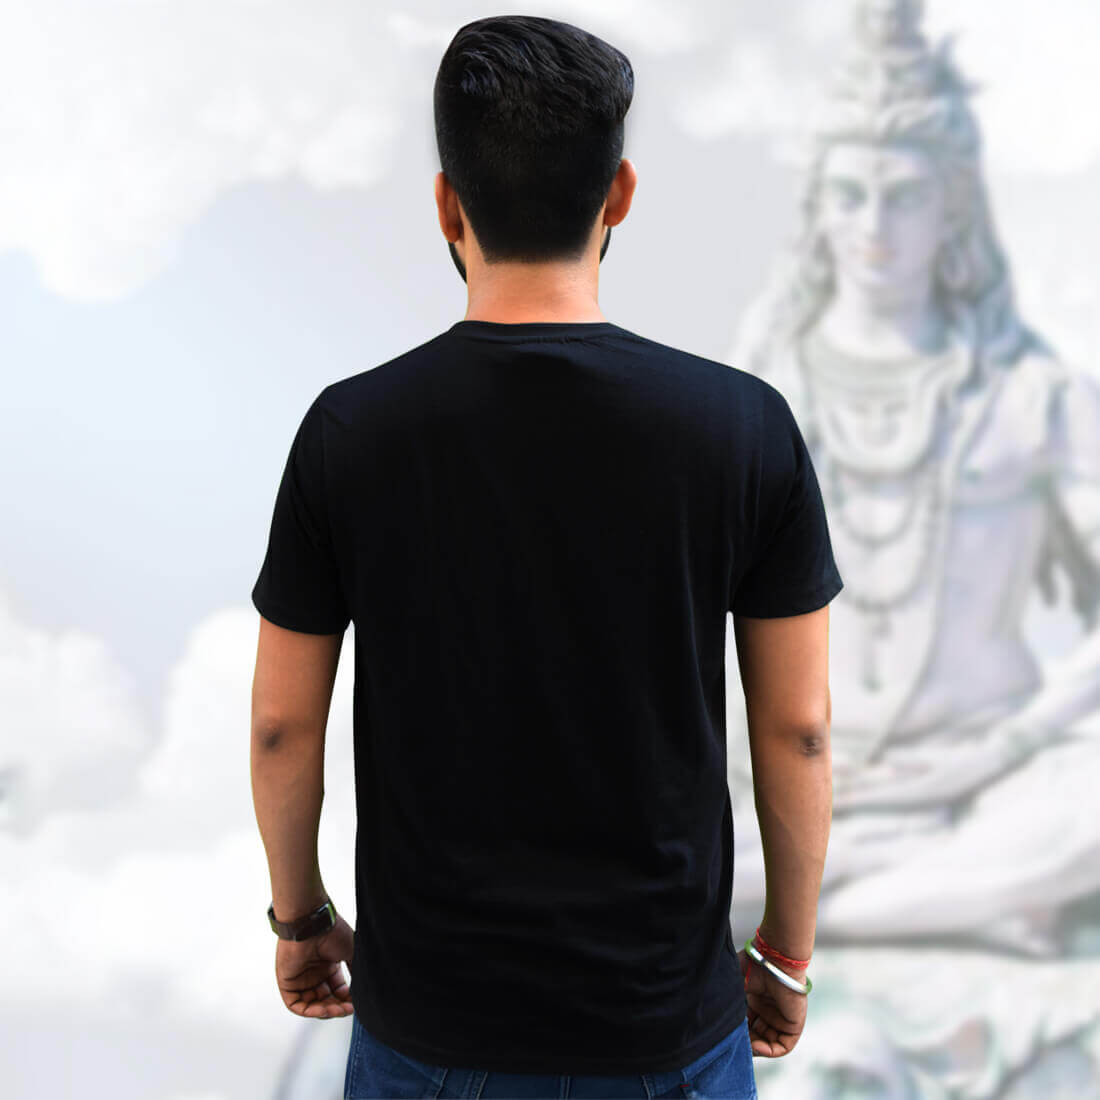 Best Inspirational Black T-Shirt Front and Back